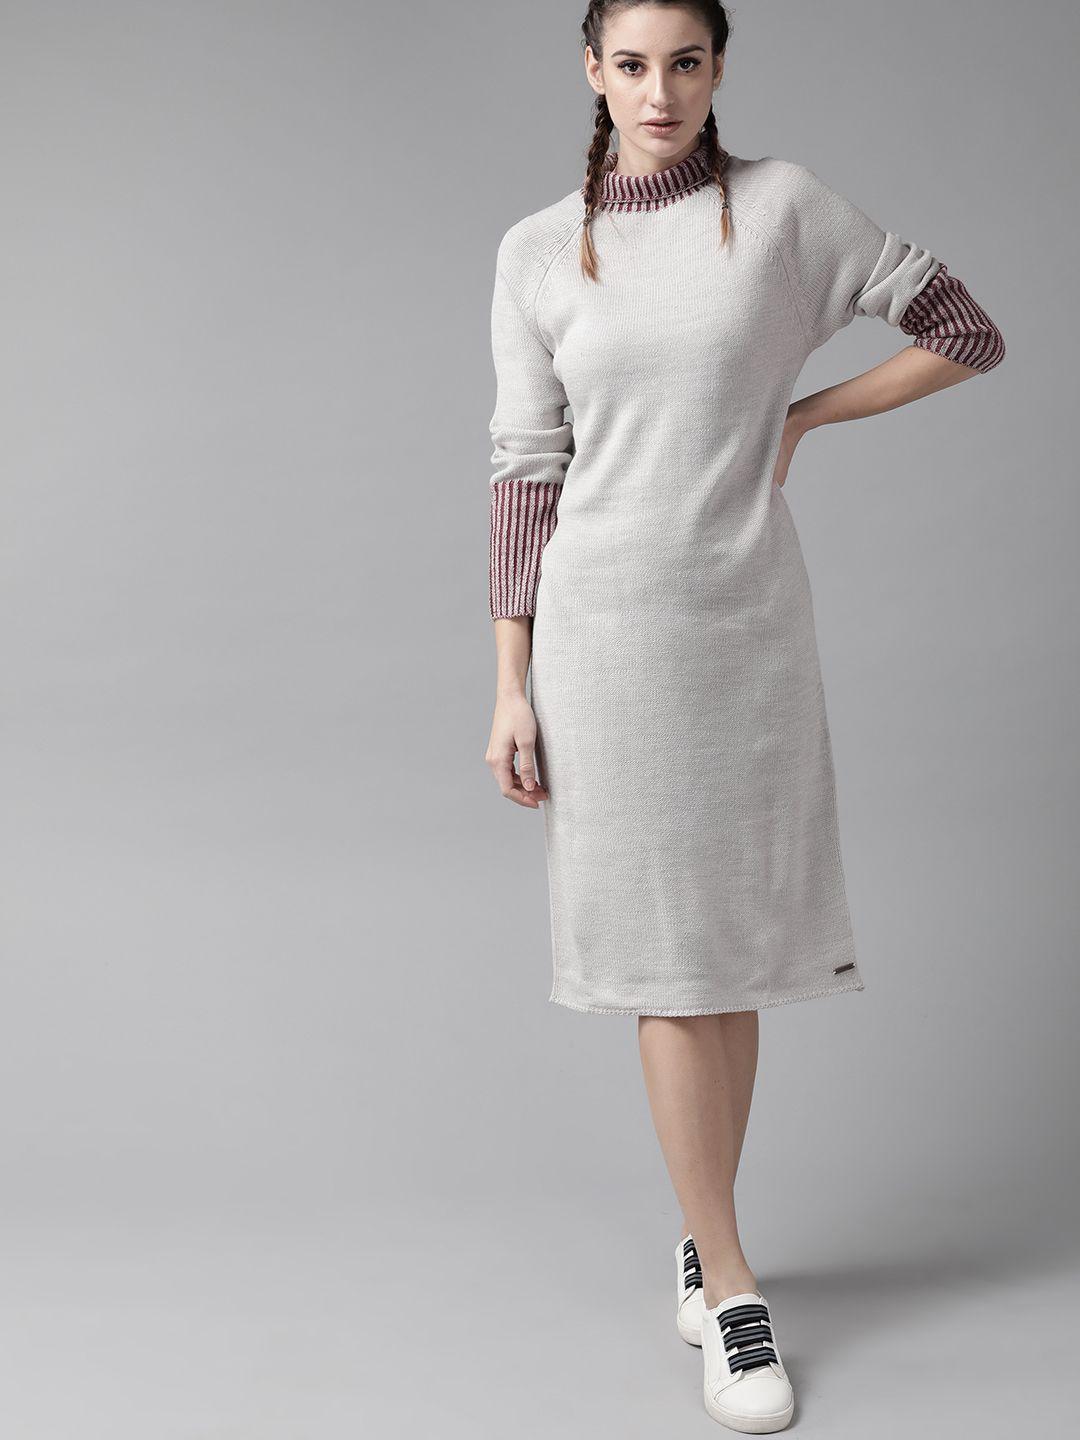 the roadster lifestyle co women grey solid sweater dress